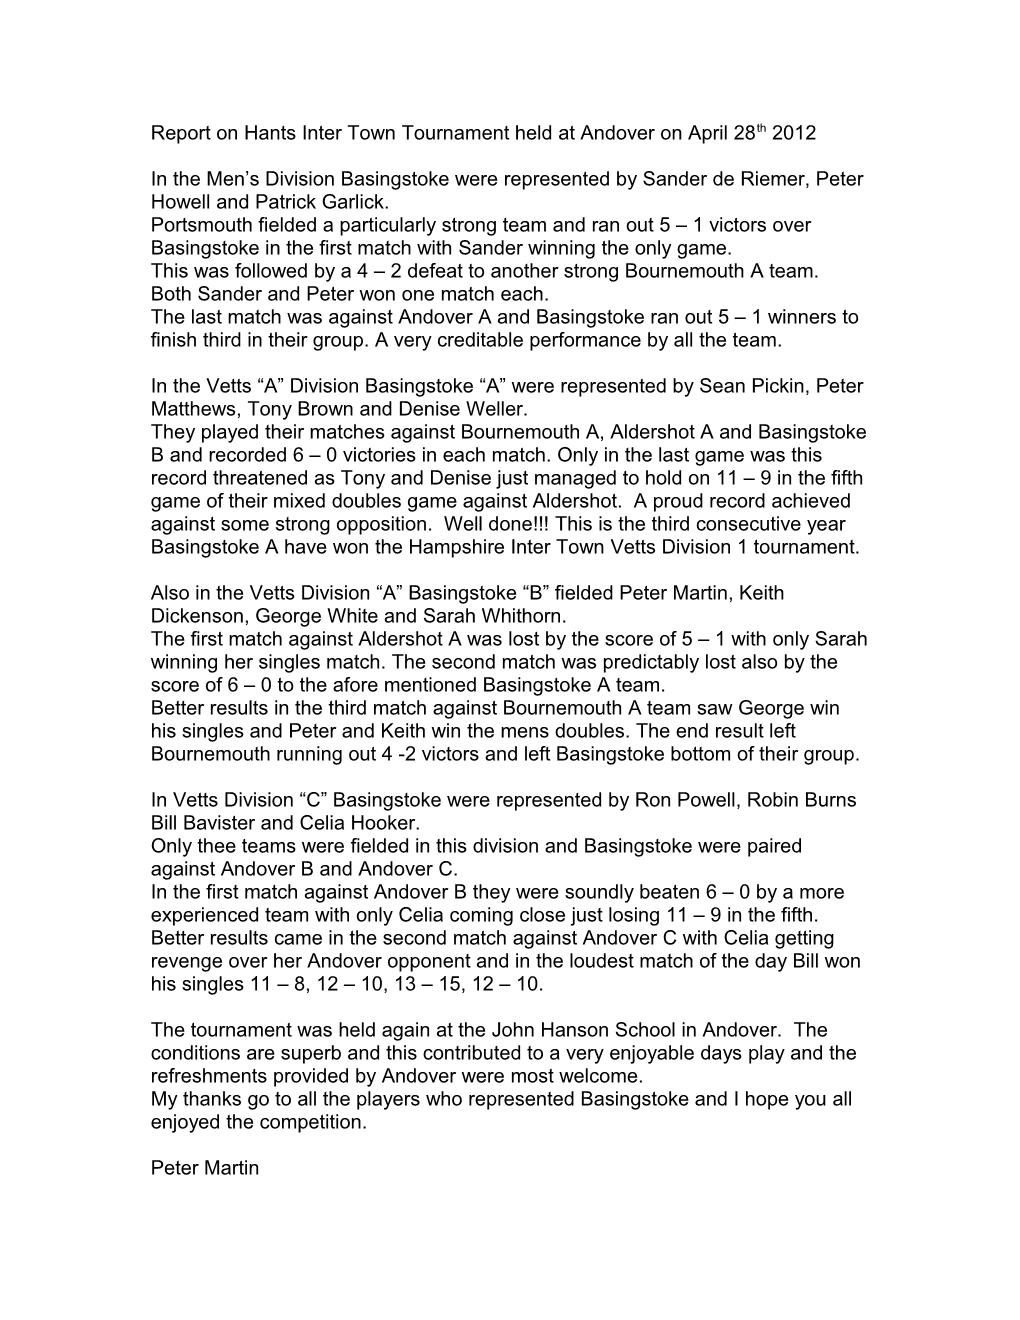 Report on Hants Inter Town Tournament Held at Andover on April 28Th 2012